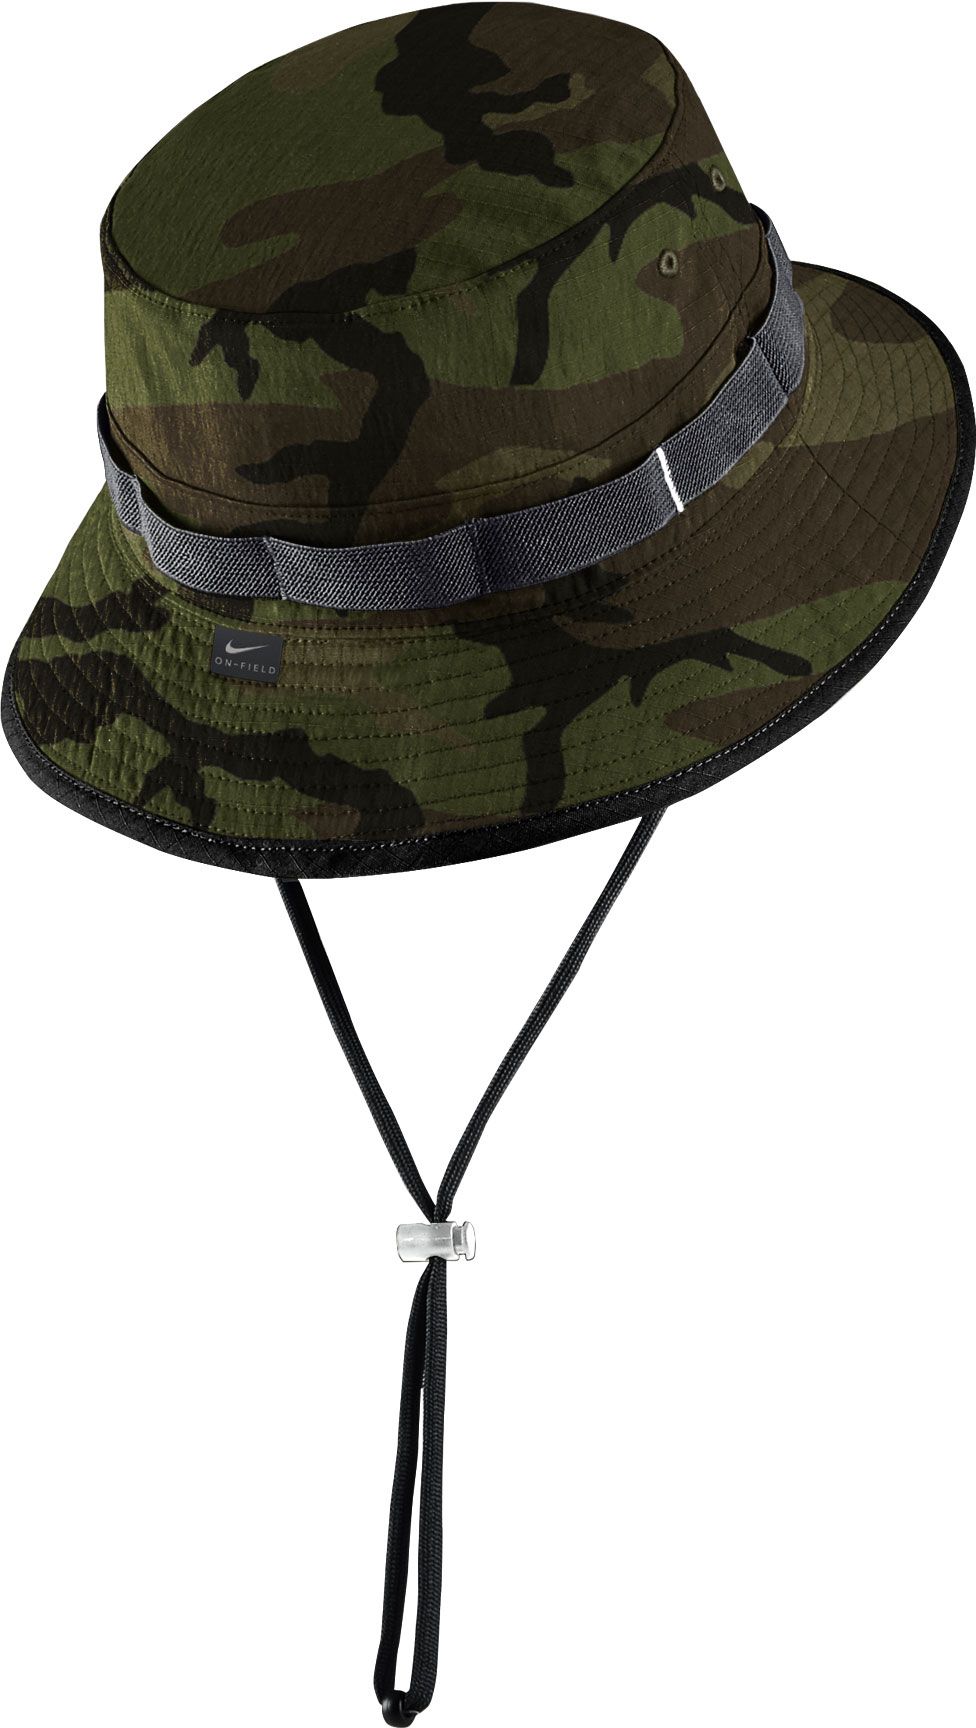 Nike Men's Air Force Falcons Camo Dry Football Sideline Bucket Hat